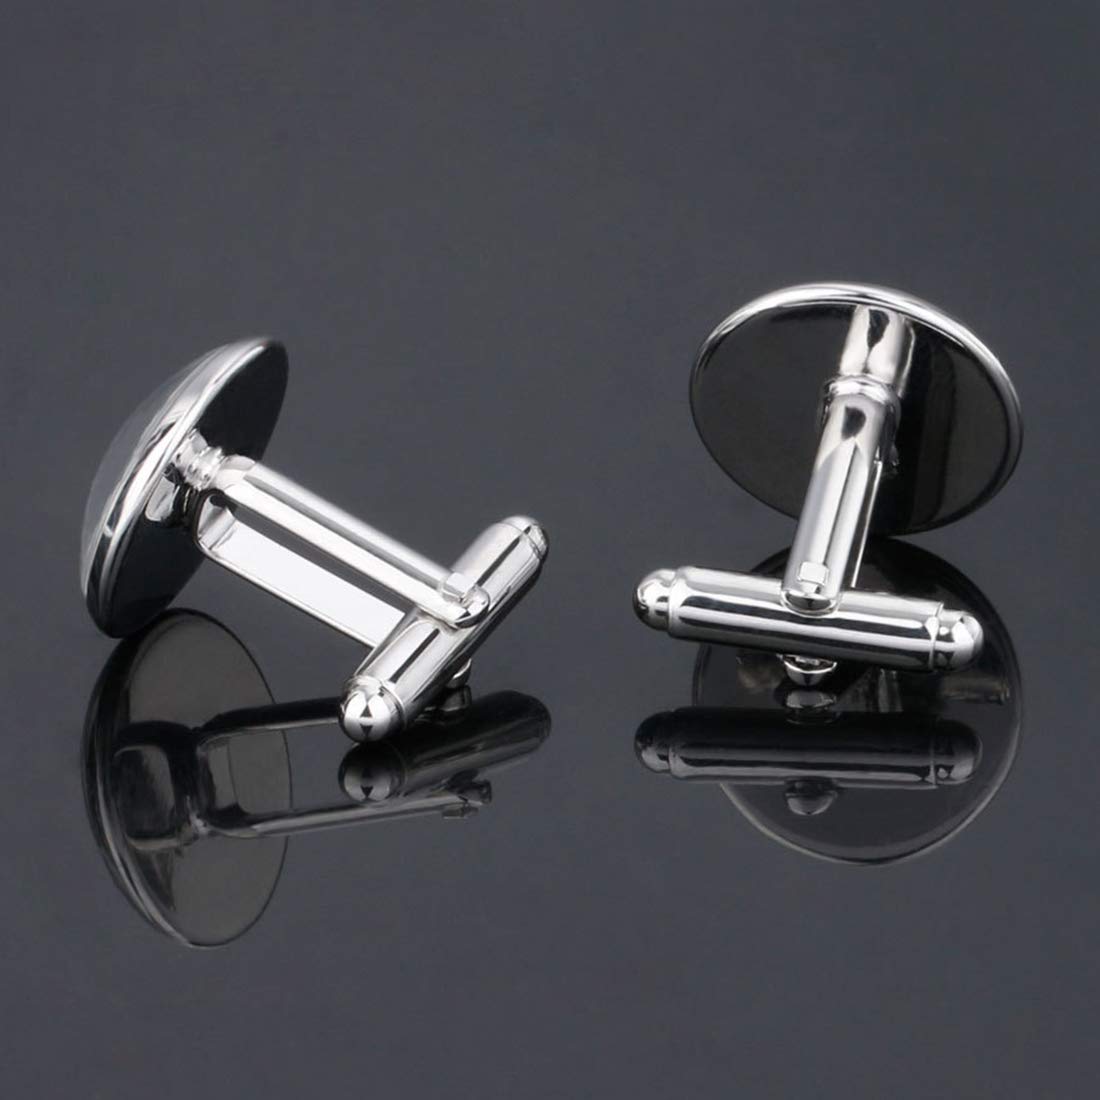 Yellow Chimes Cufflinks for Men Alphabets Cuff links Letter P Statement Stainless Steel Cufflinks for Men and Boy's